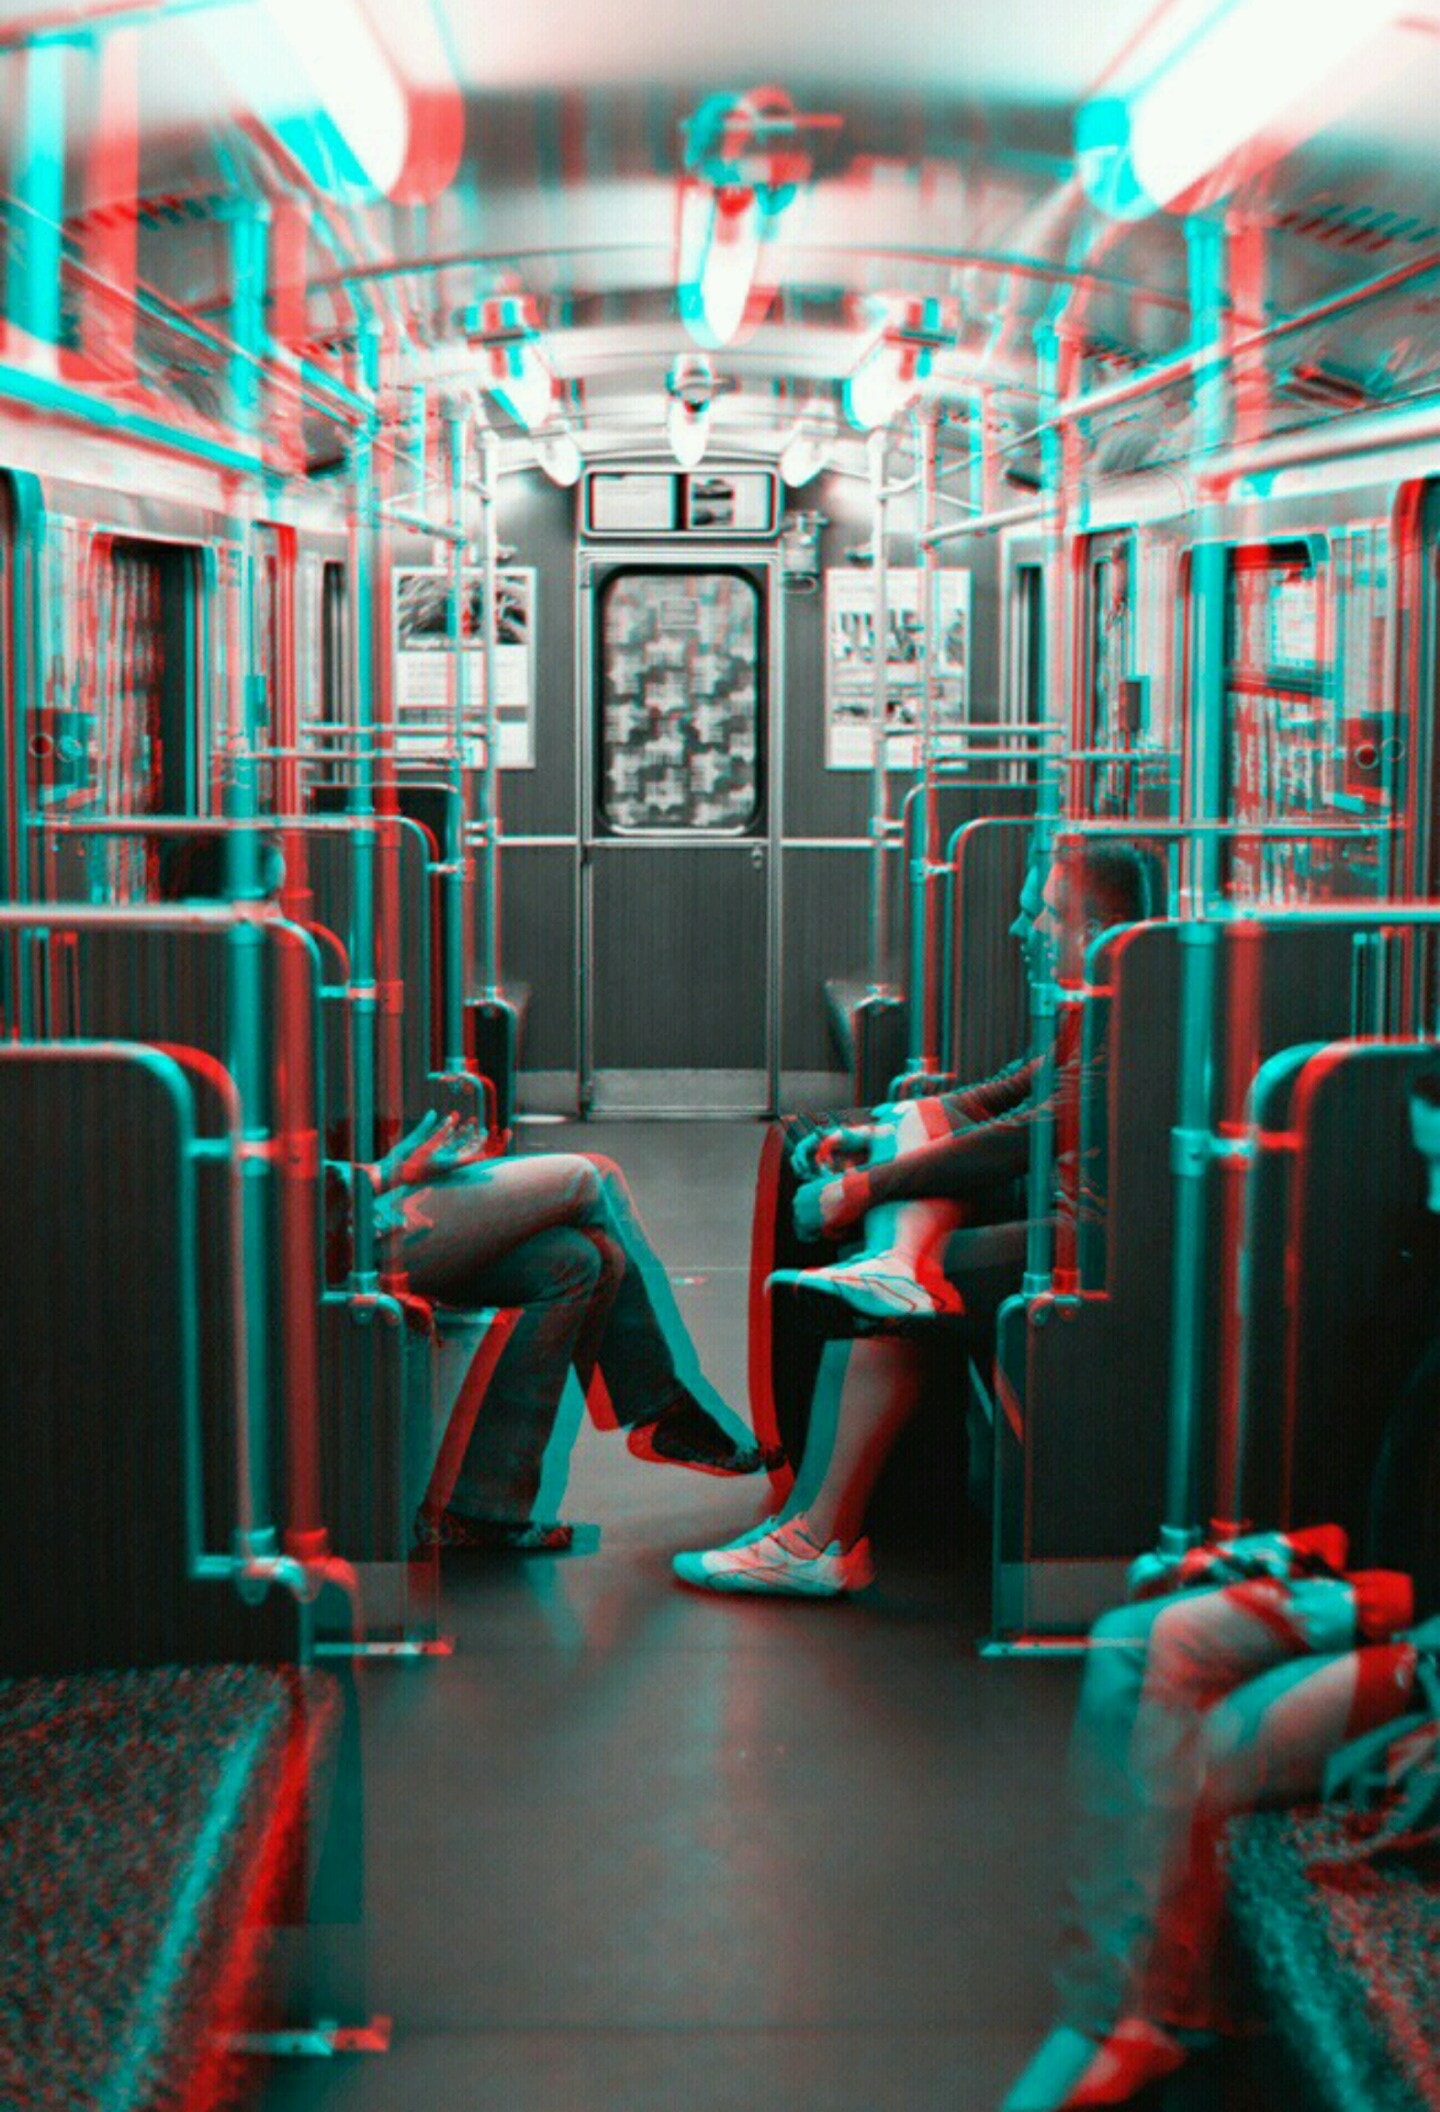 A black and white photo of the interior of a subway car. Two people's legs rest in the middle, facing each other. There is red and blue chromatic aberration overlayed on top of the image.